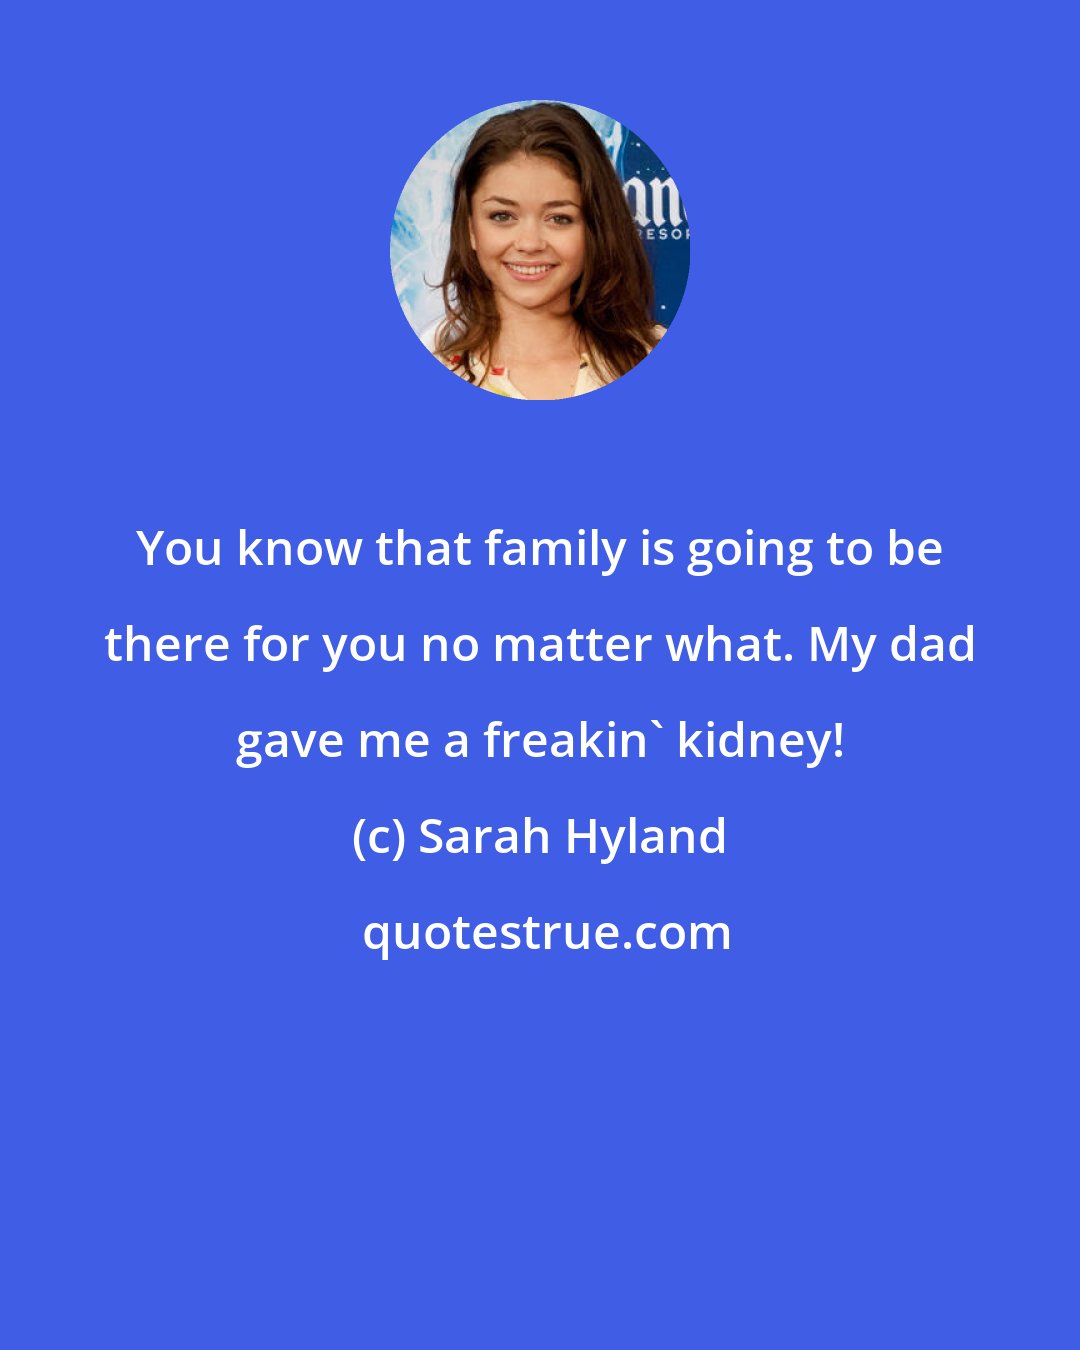 Sarah Hyland: You know that family is going to be there for you no matter what. My dad gave me a freakin' kidney!